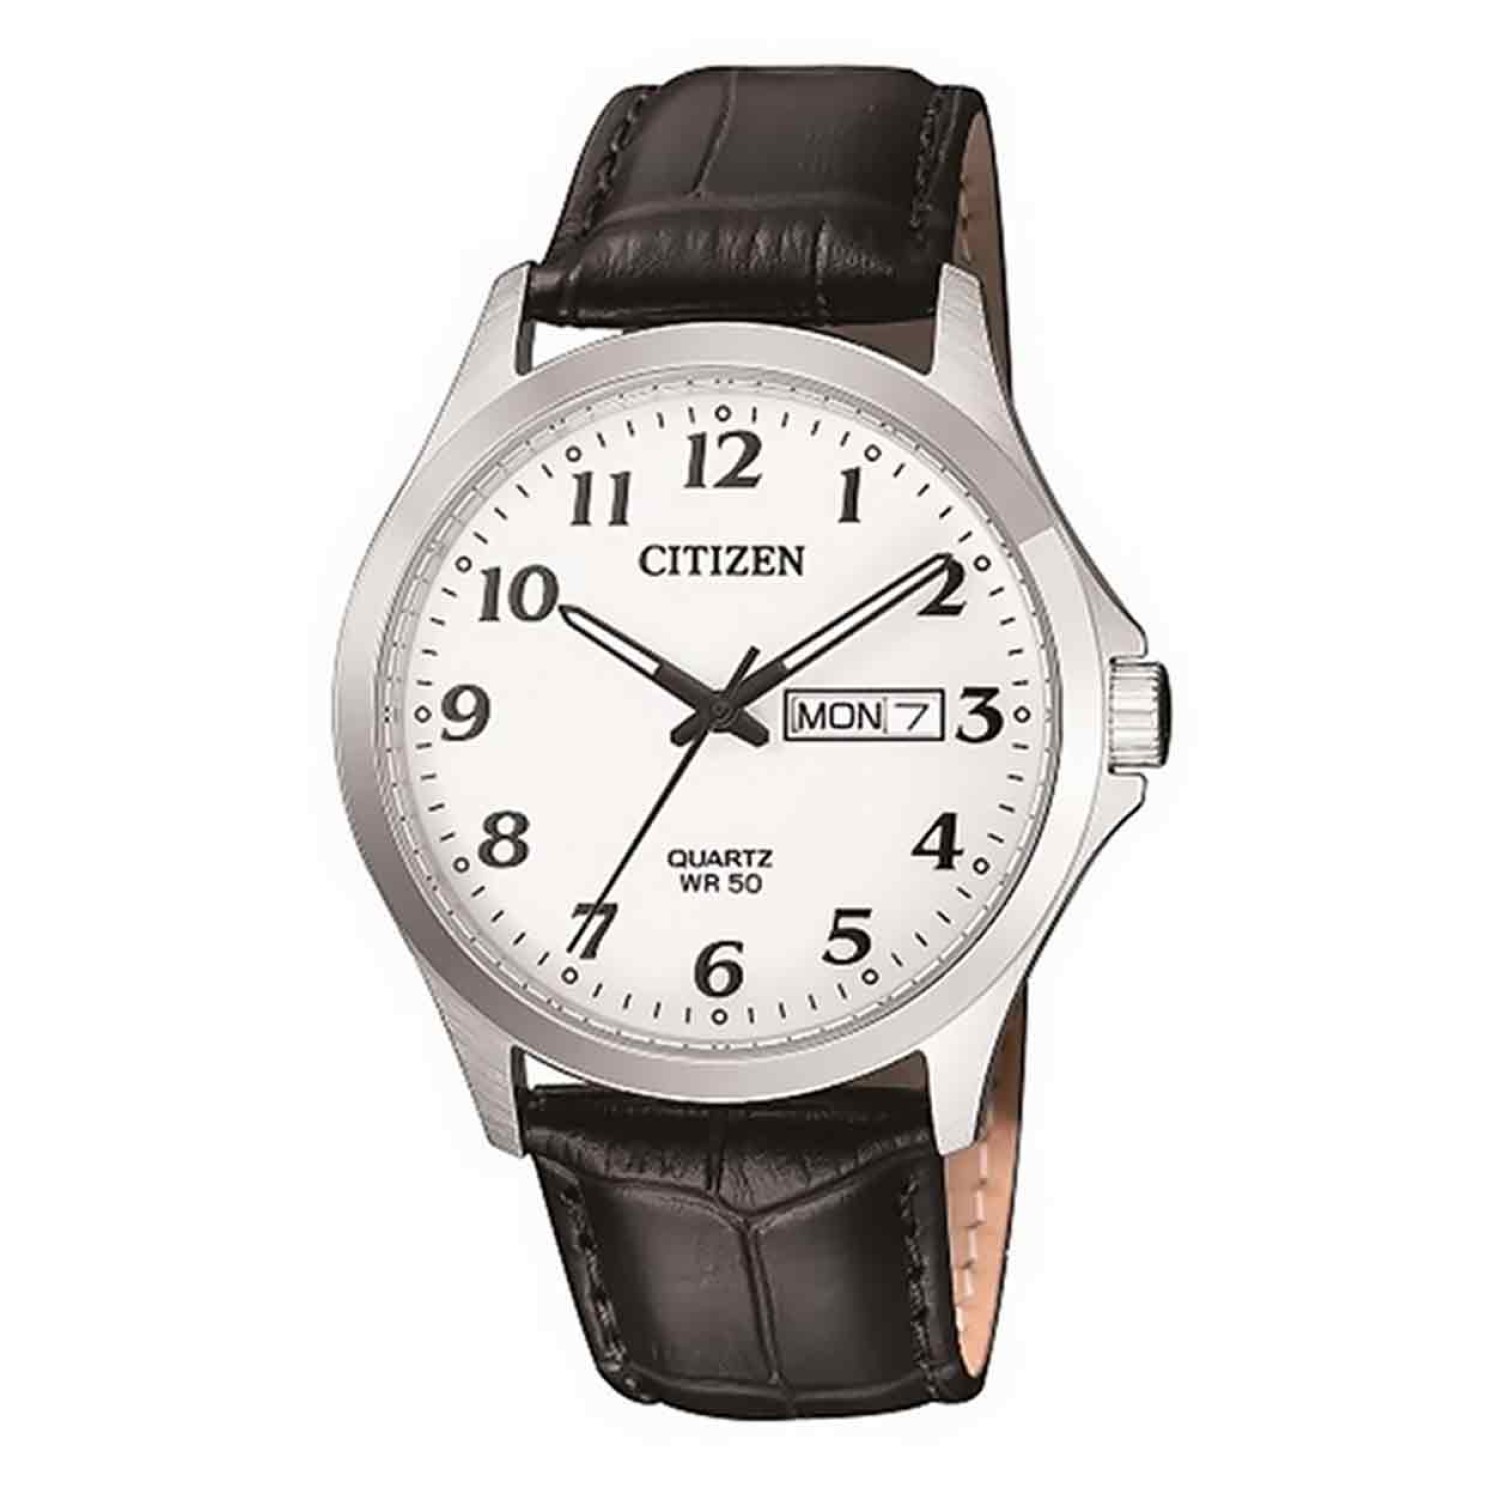 BF5000-01A Citizen Mens Stainless Steel  Watch. Crafted From Robust Stainless Steel And Featuring An Ivory White Dial With Easy To Read Black Markings And Date Display, Silver Toned Bezel And Bold Obsidian Oxhide Leather Strap For Comfort, This Watch Embo